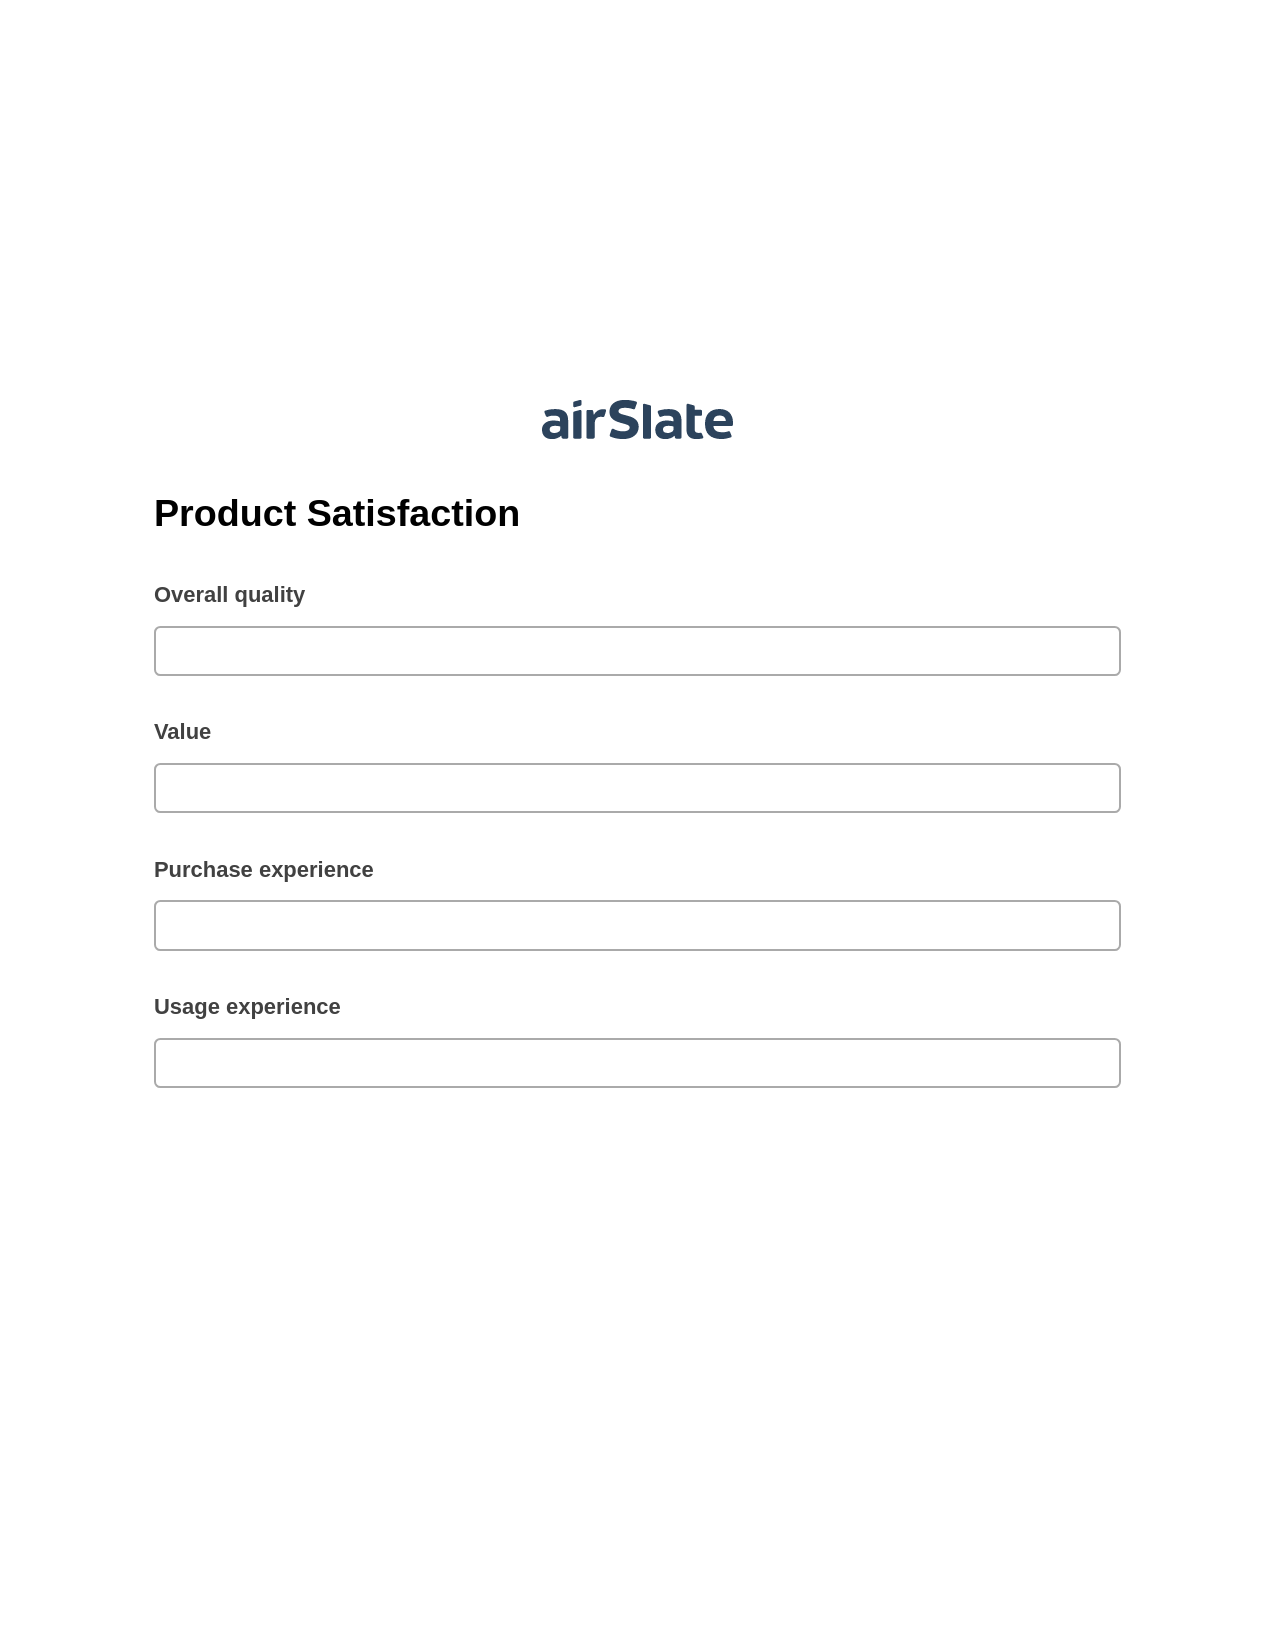 Product Satisfaction Pre-fill from another Slate Bot, Open as Role Bot, Post-finish Document Bot